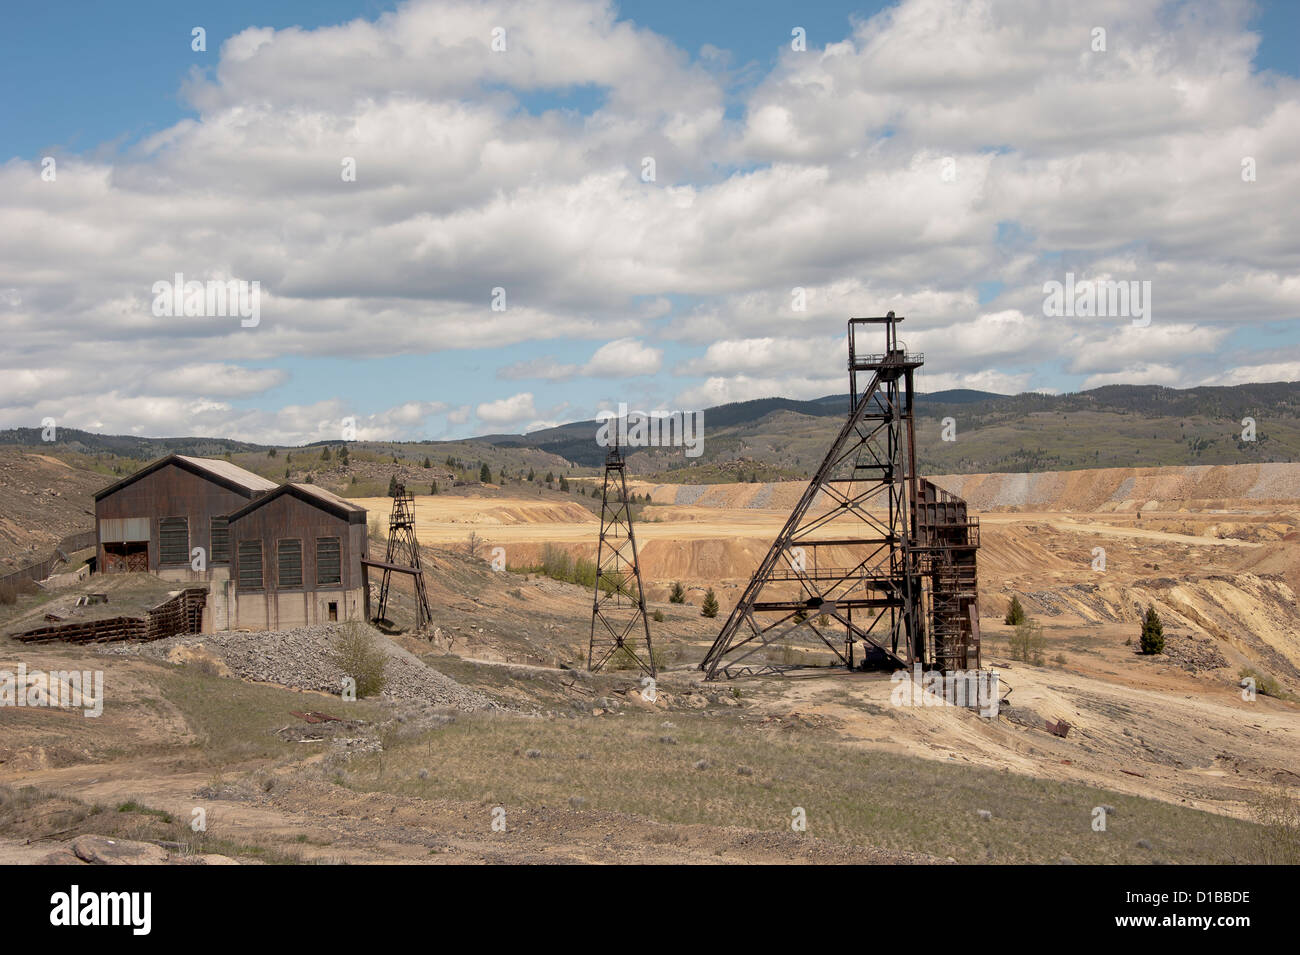 Contamination from mining in Butte, Montana.  The mining was hard core drilling and open pit mining. Stock Photo